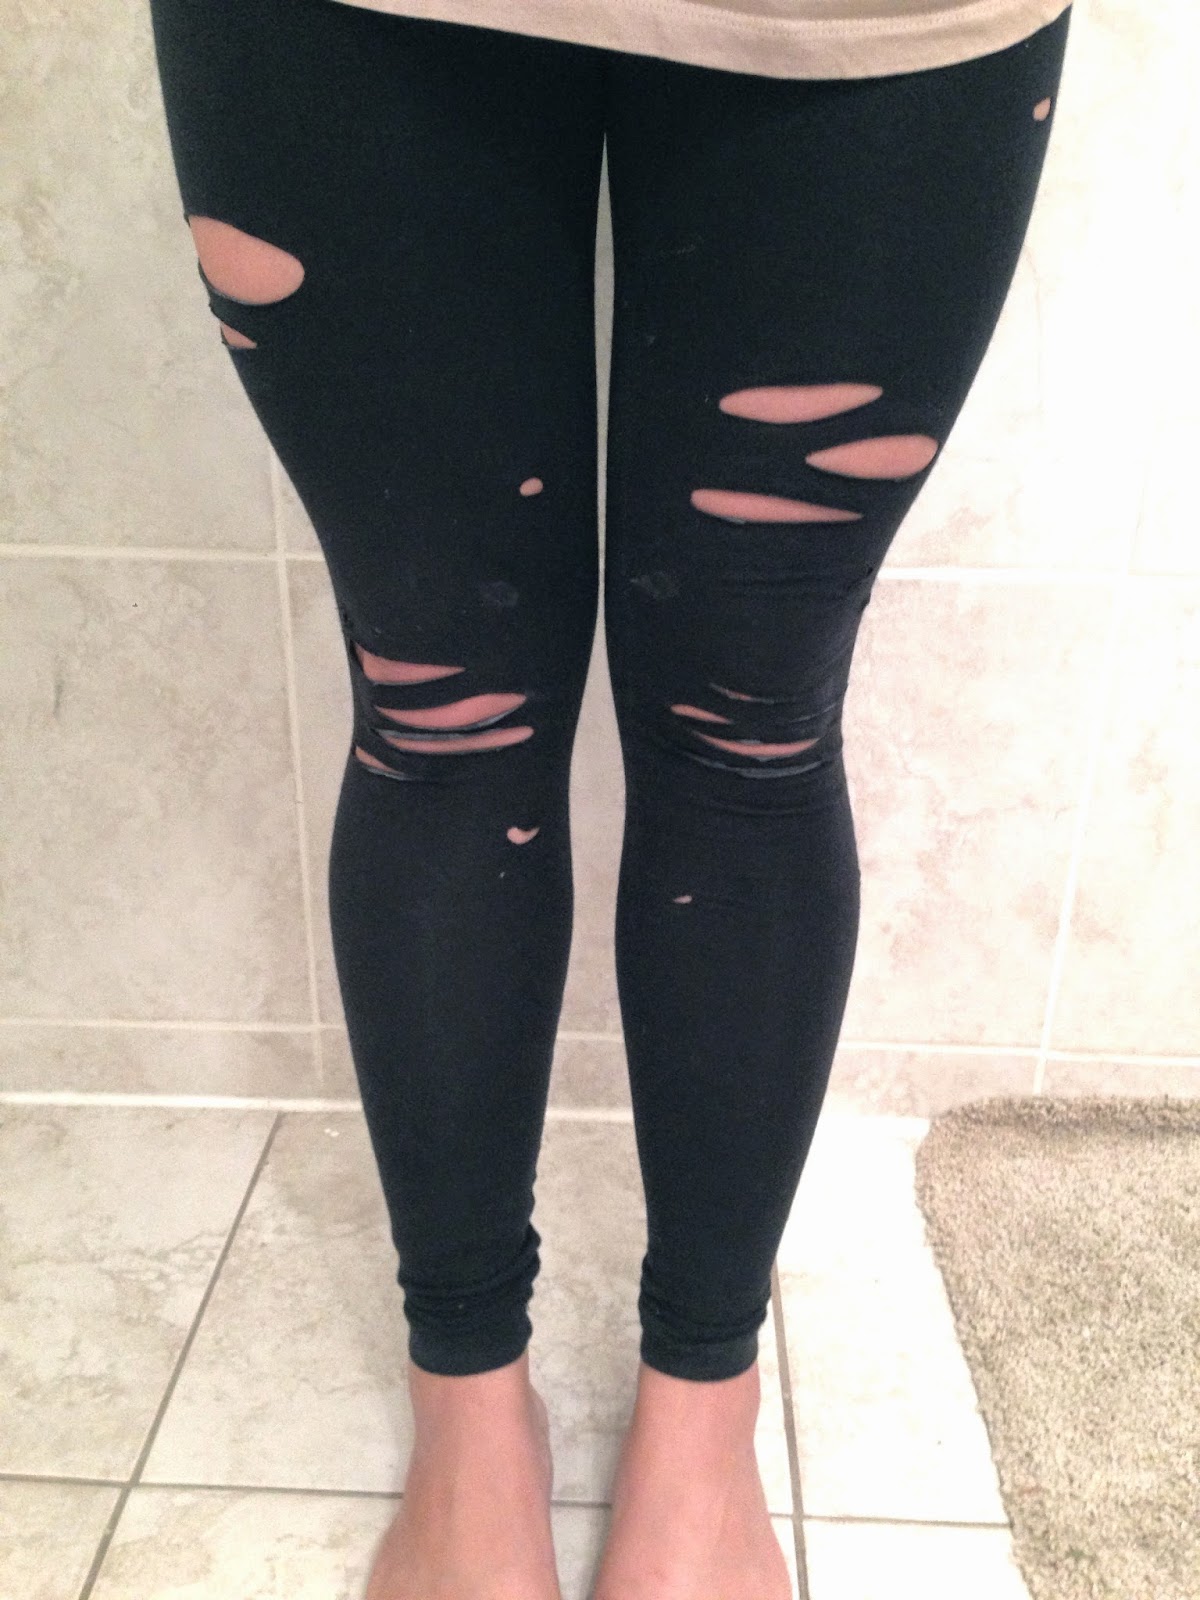 How To Fix Leggings With Holes In Theme